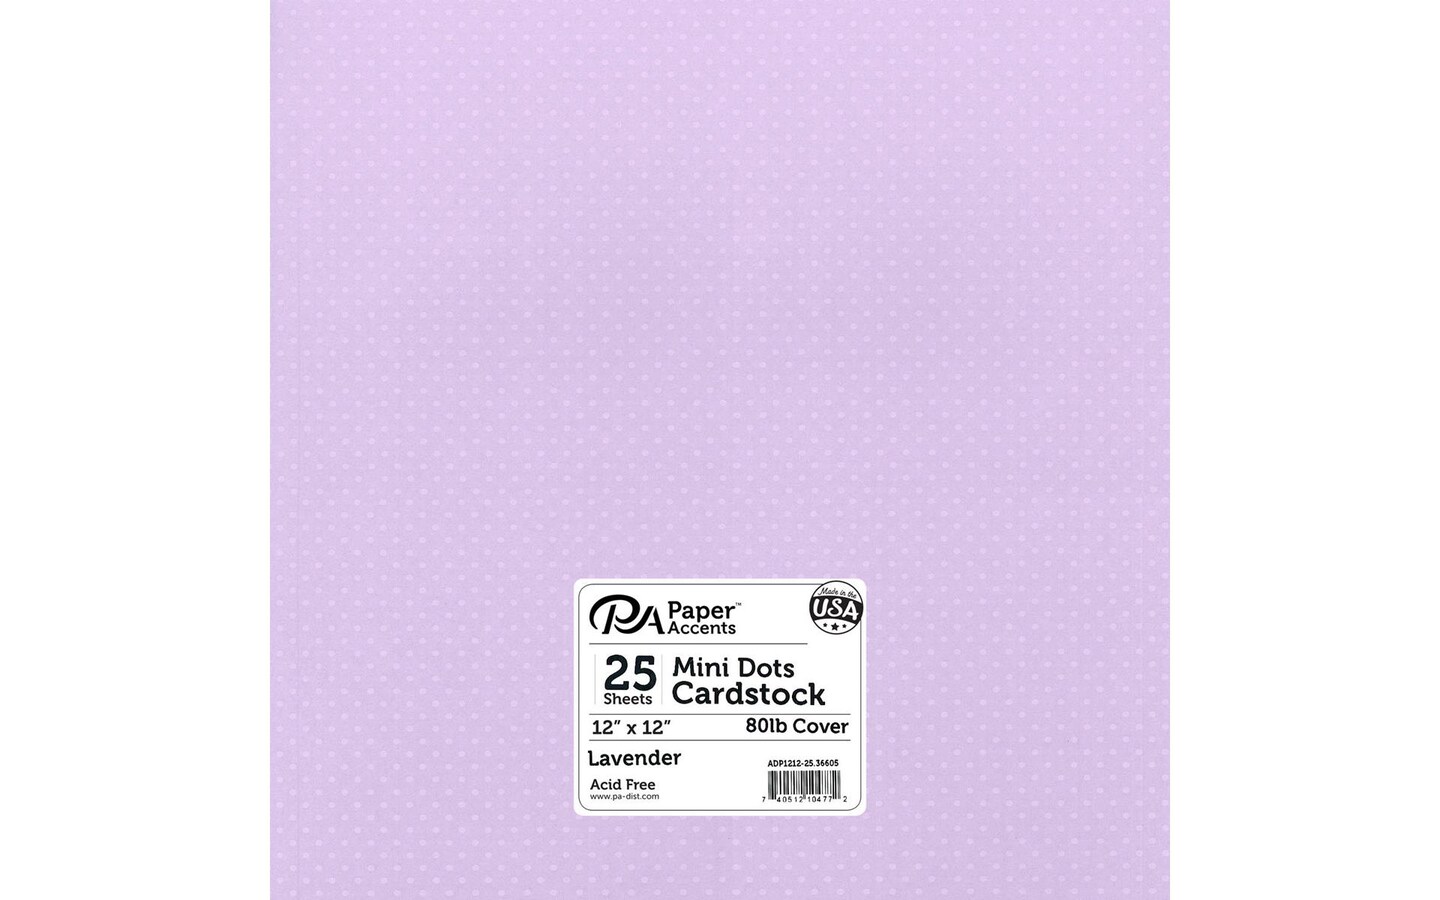 PA Paper Accents Mini Dots Cardstock 12